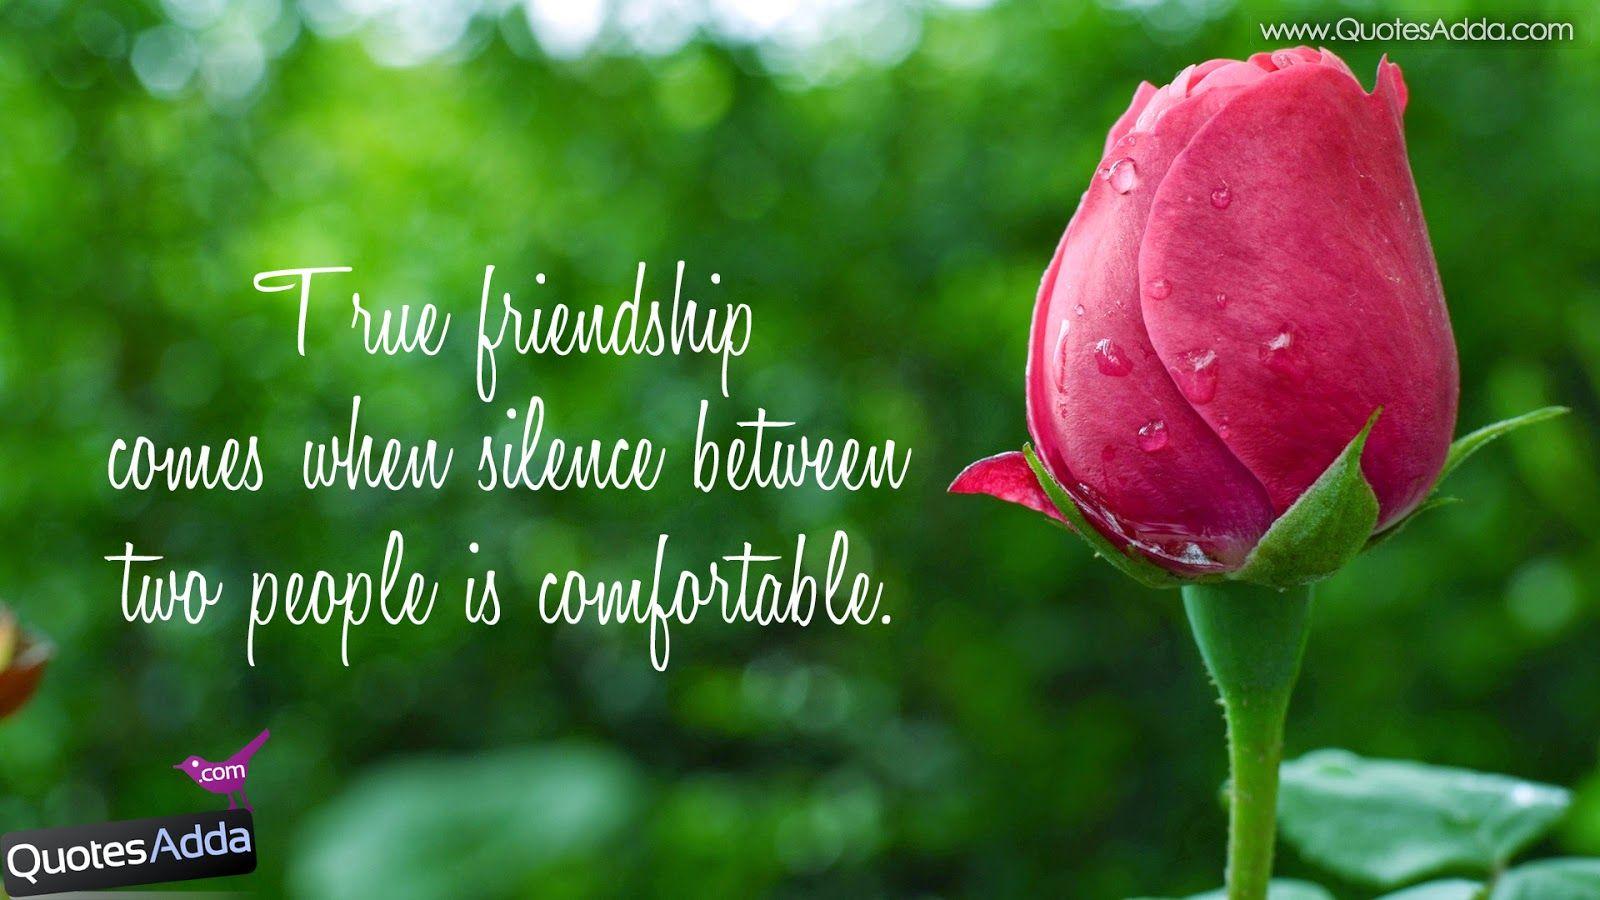 Cute Friendship Quotes With Image Friendship wallpaper 1600x900